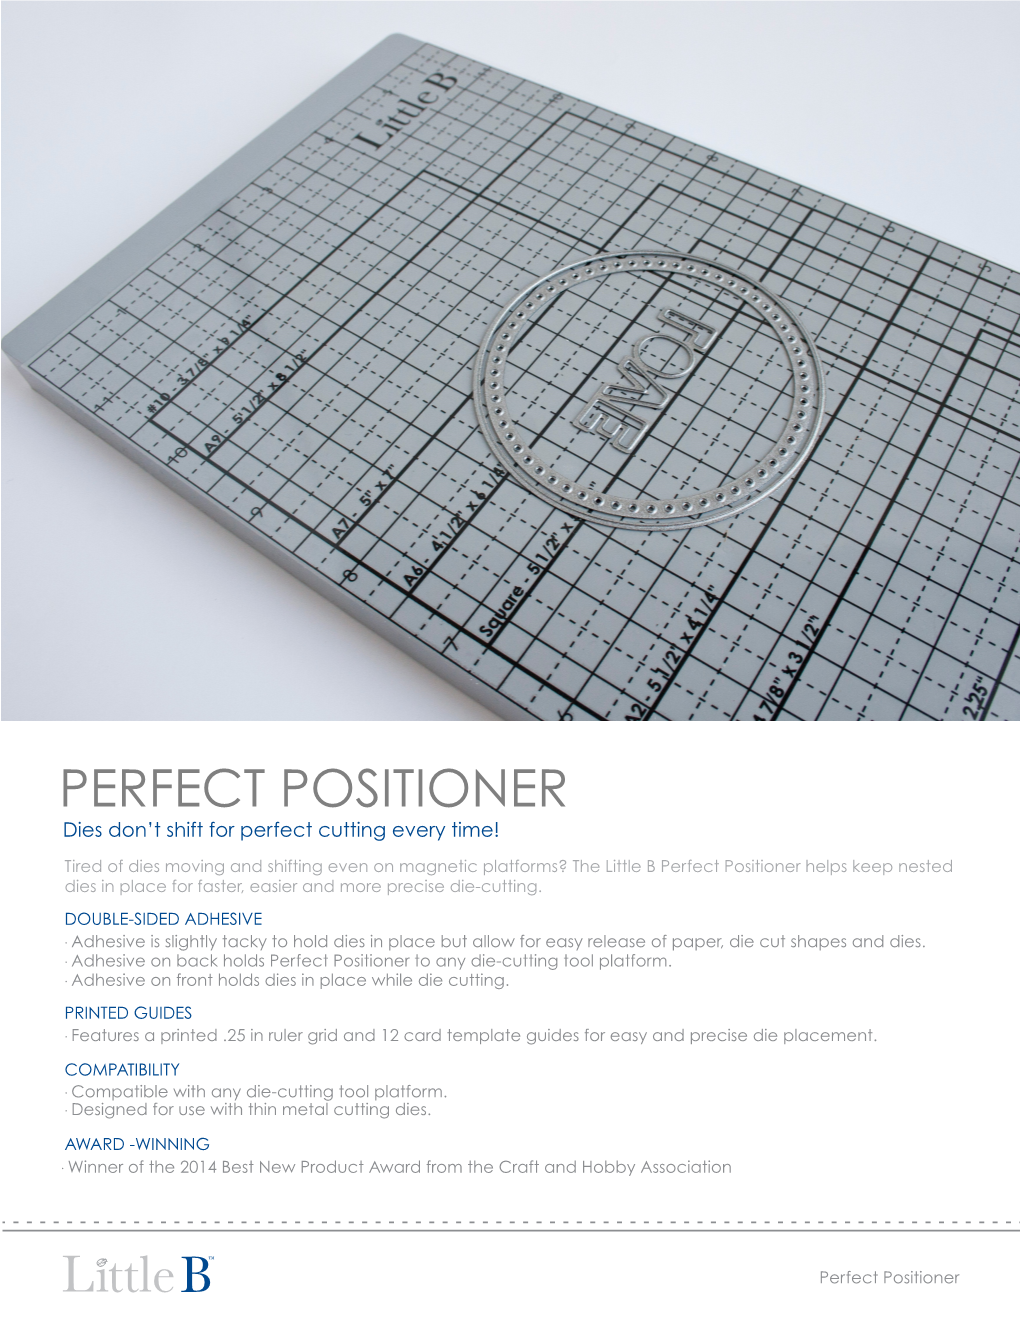 Perfect Positioner Guide